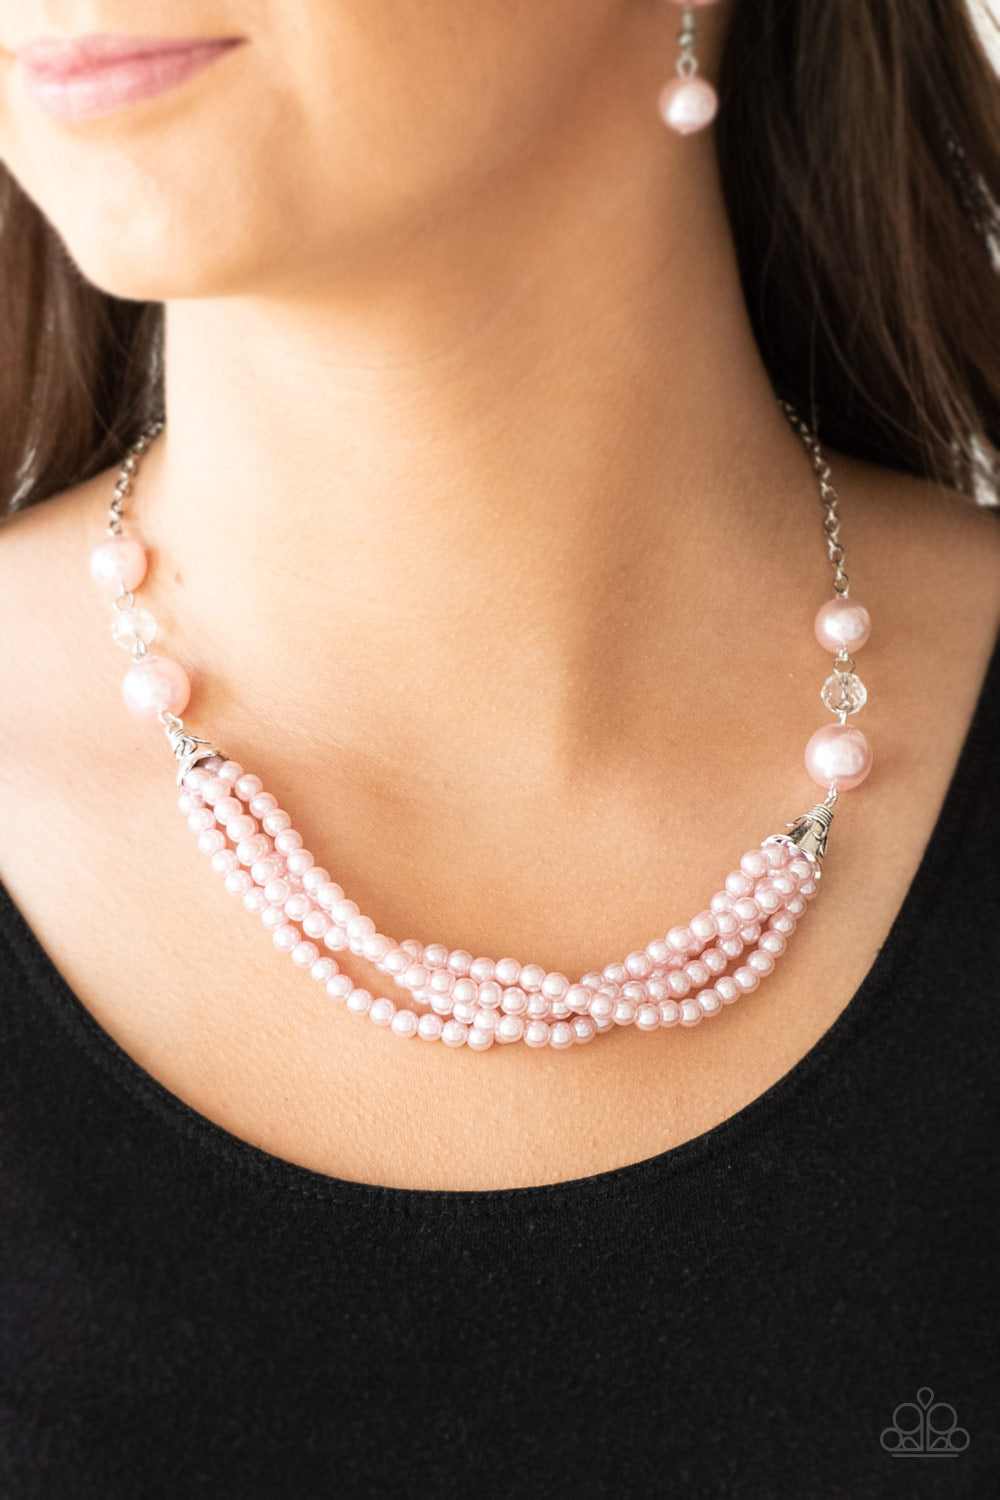 Paparazzi Necklace ~ One-WOMAN Show - Pink Pearls Necklace